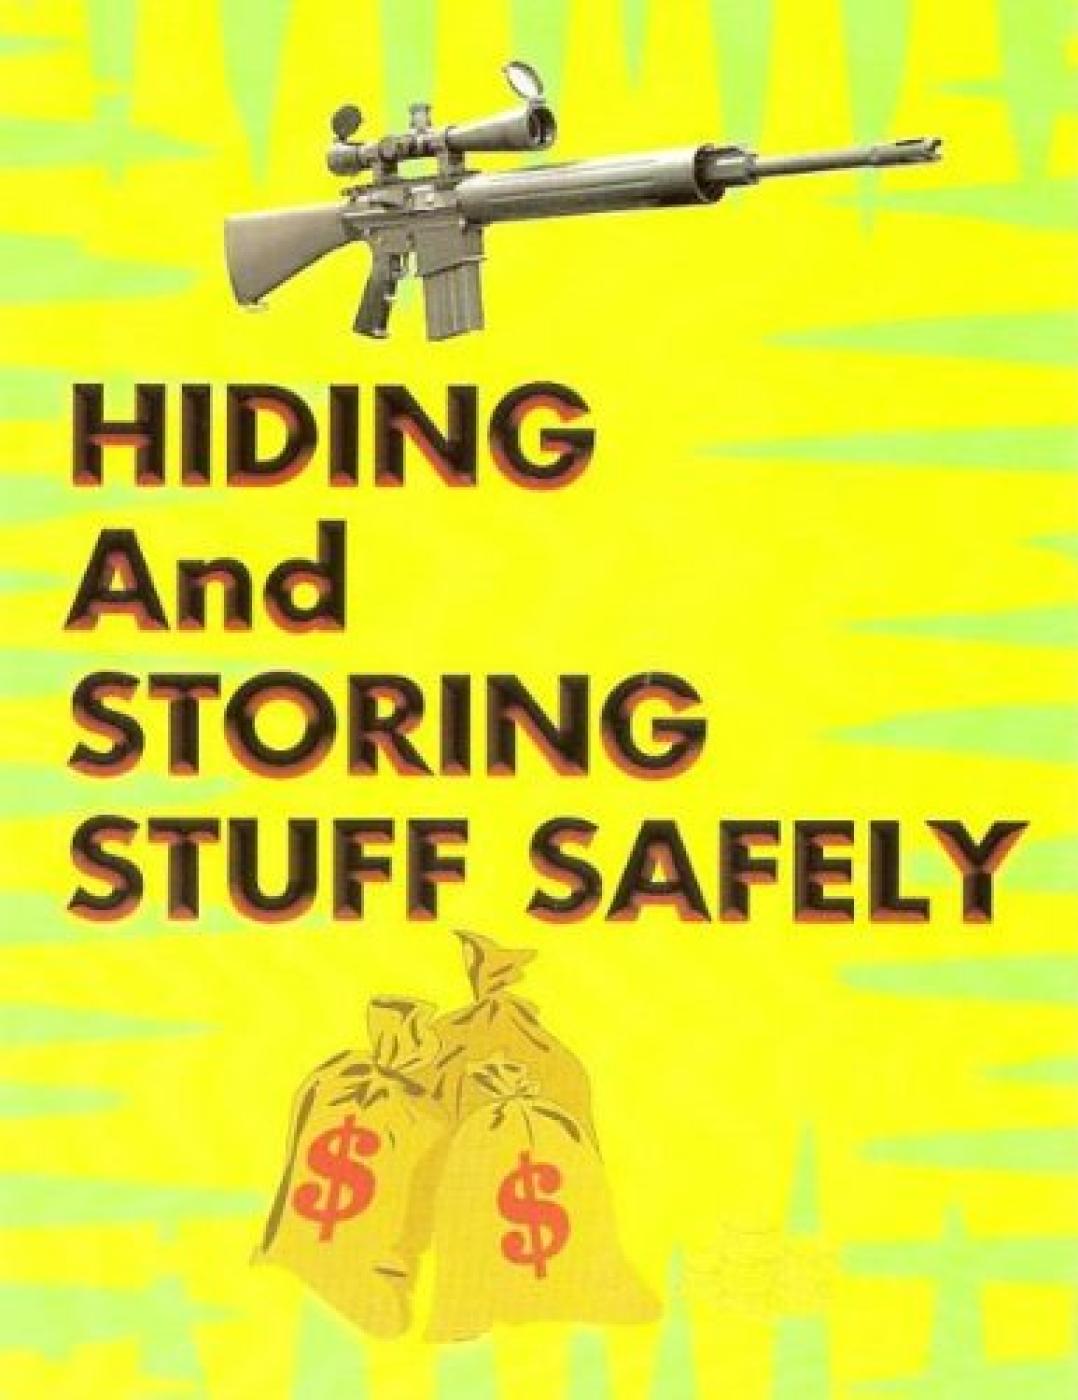 HIDING AND STORING STUFF SAFELY